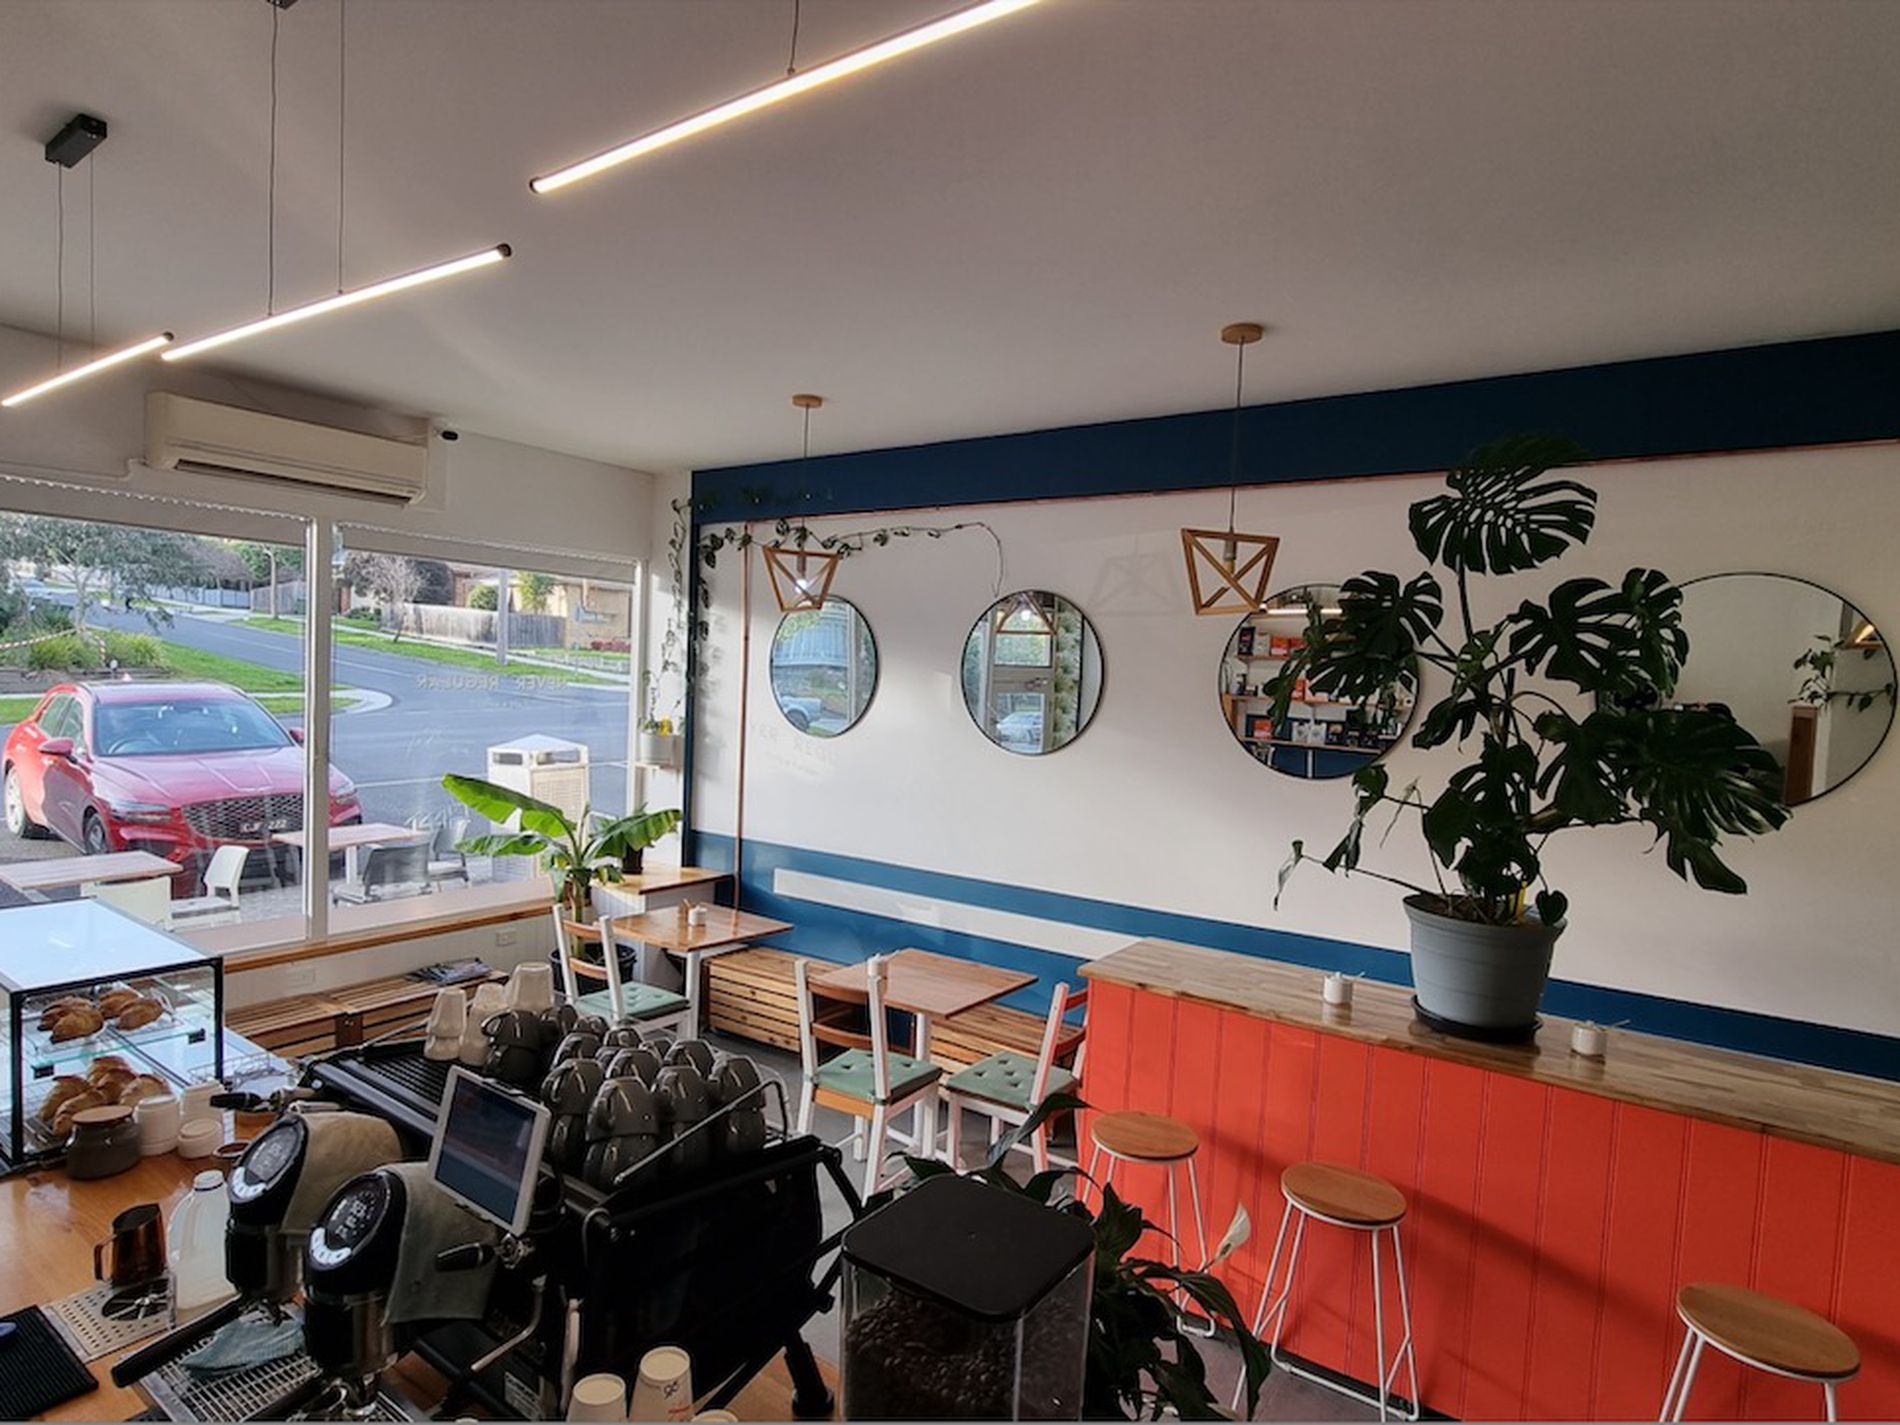 Cafe Business for Sale in Heathmont with lots of Potential